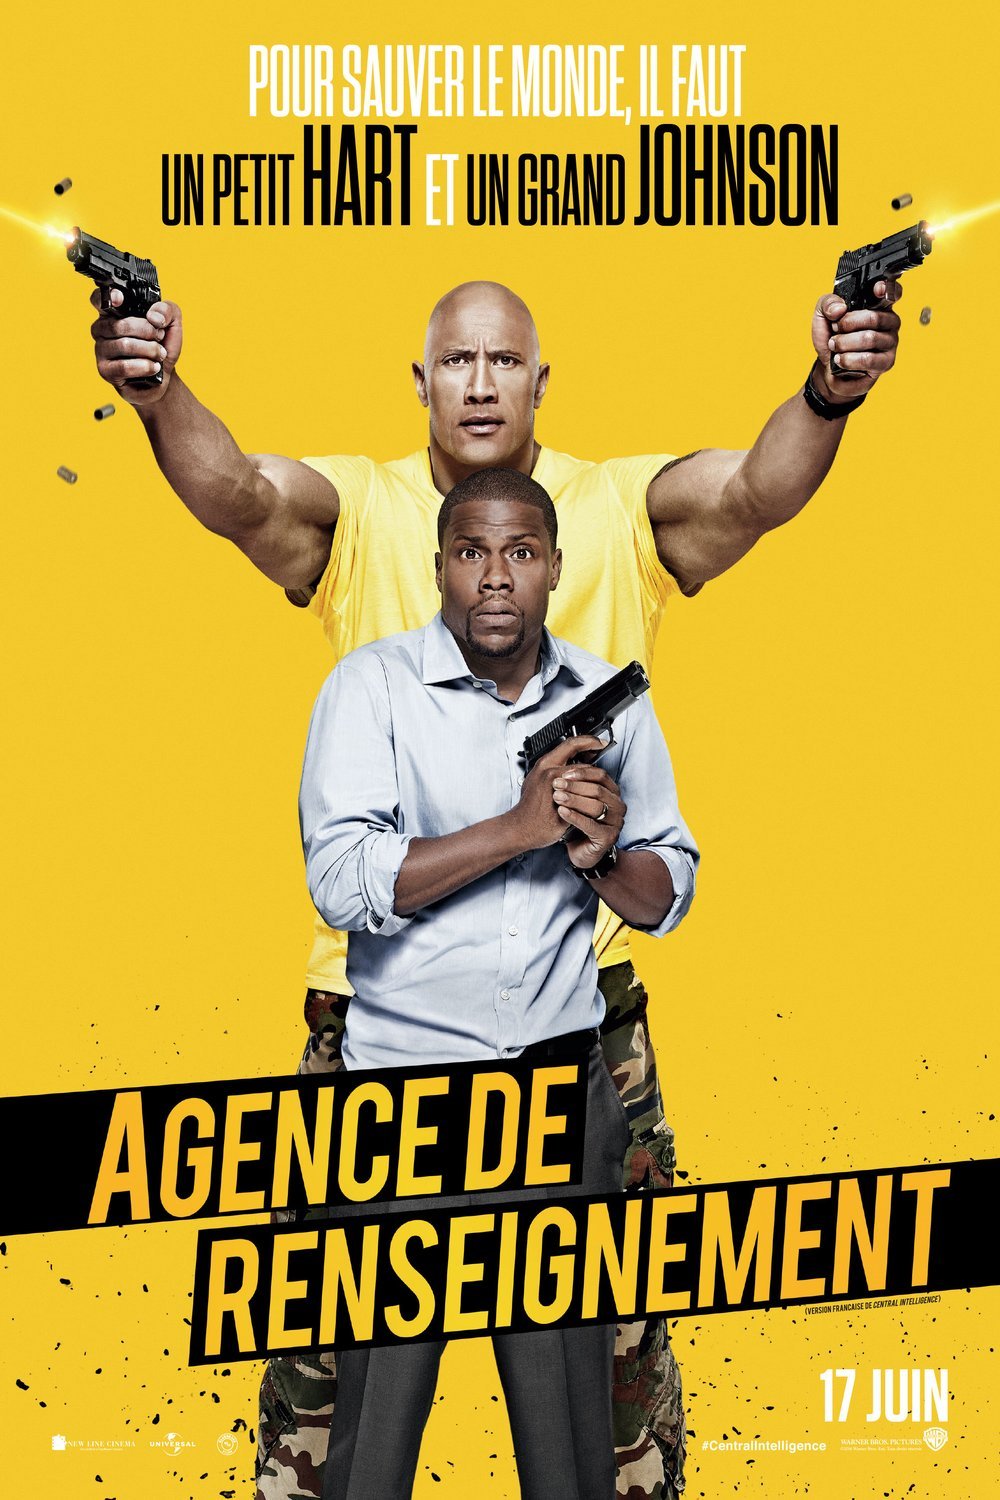 Poster of the movie Agence de renseignement